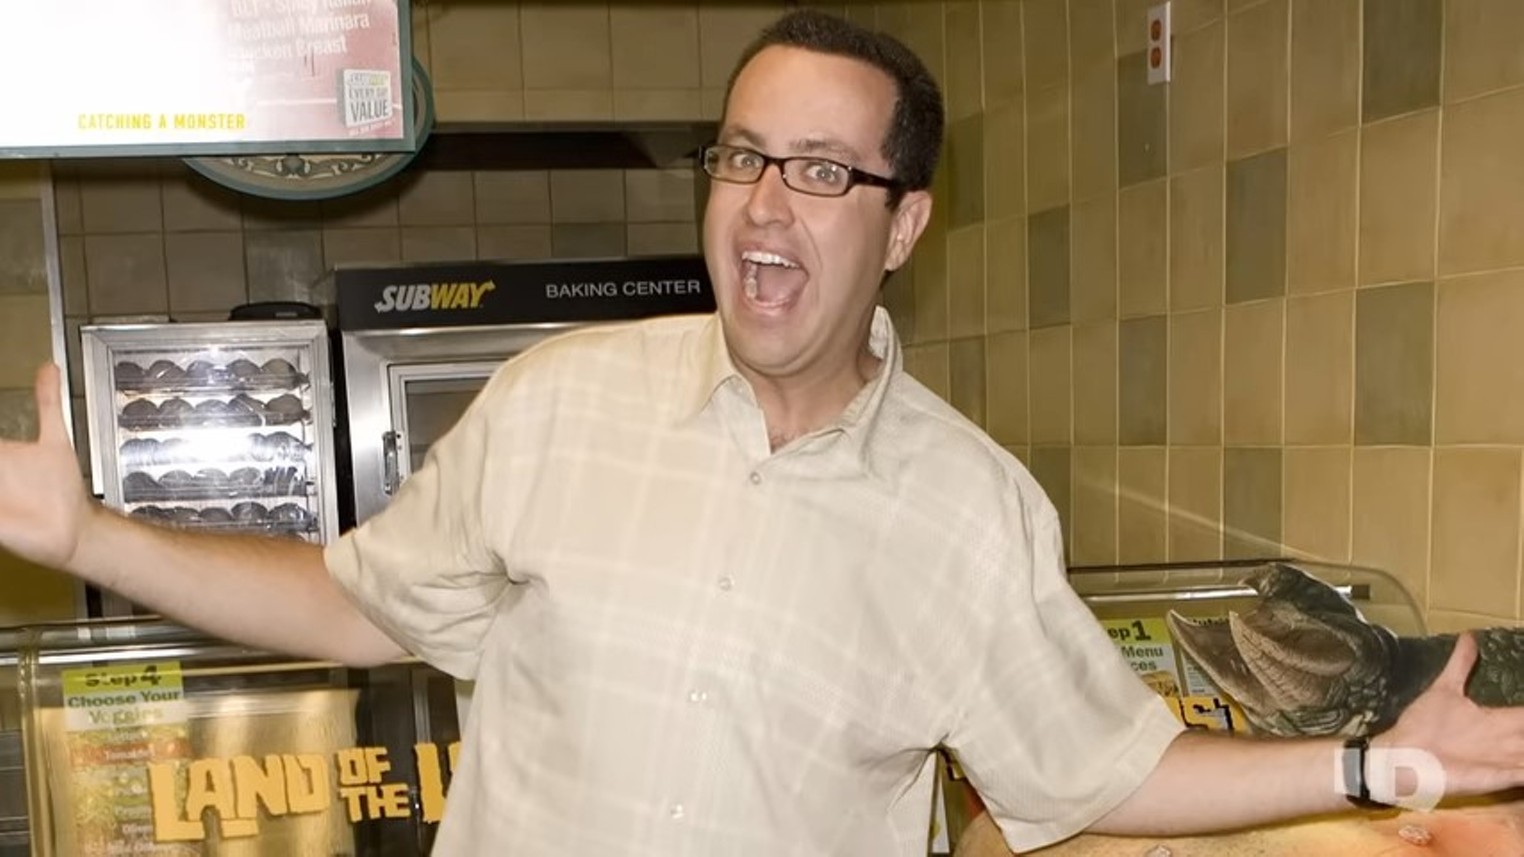 Watch Jared Fogle Comment on 'To Catch a Predator' Suspects in